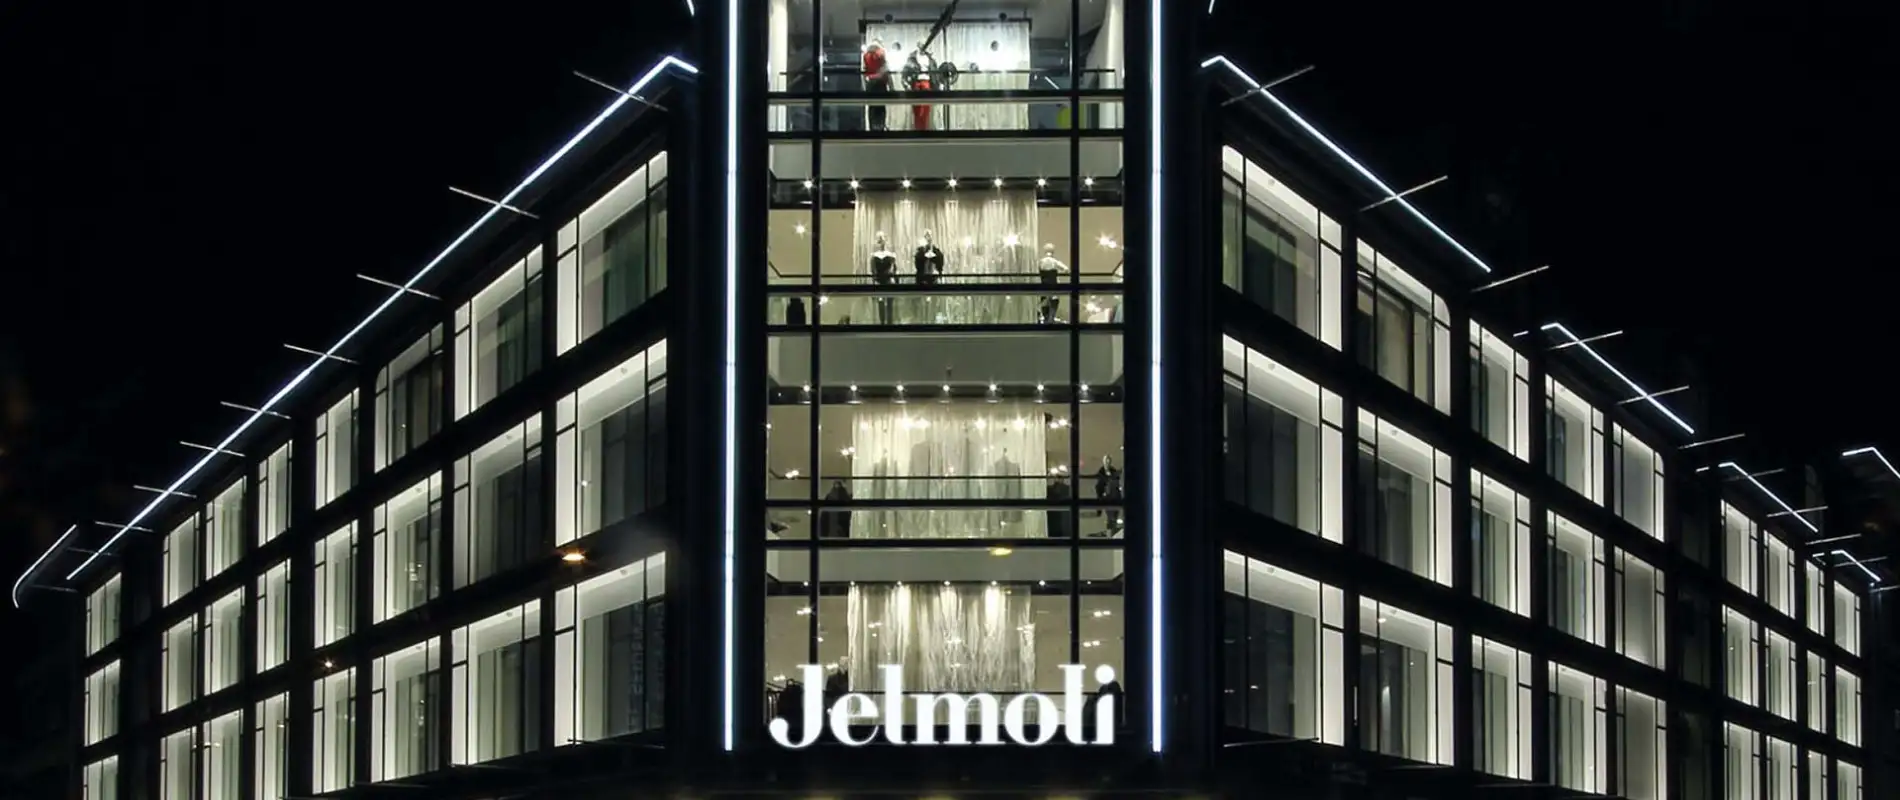 new structuring of the sales area - modern development concept - department store - Jelmoli Zurich - building facade enlighted by night